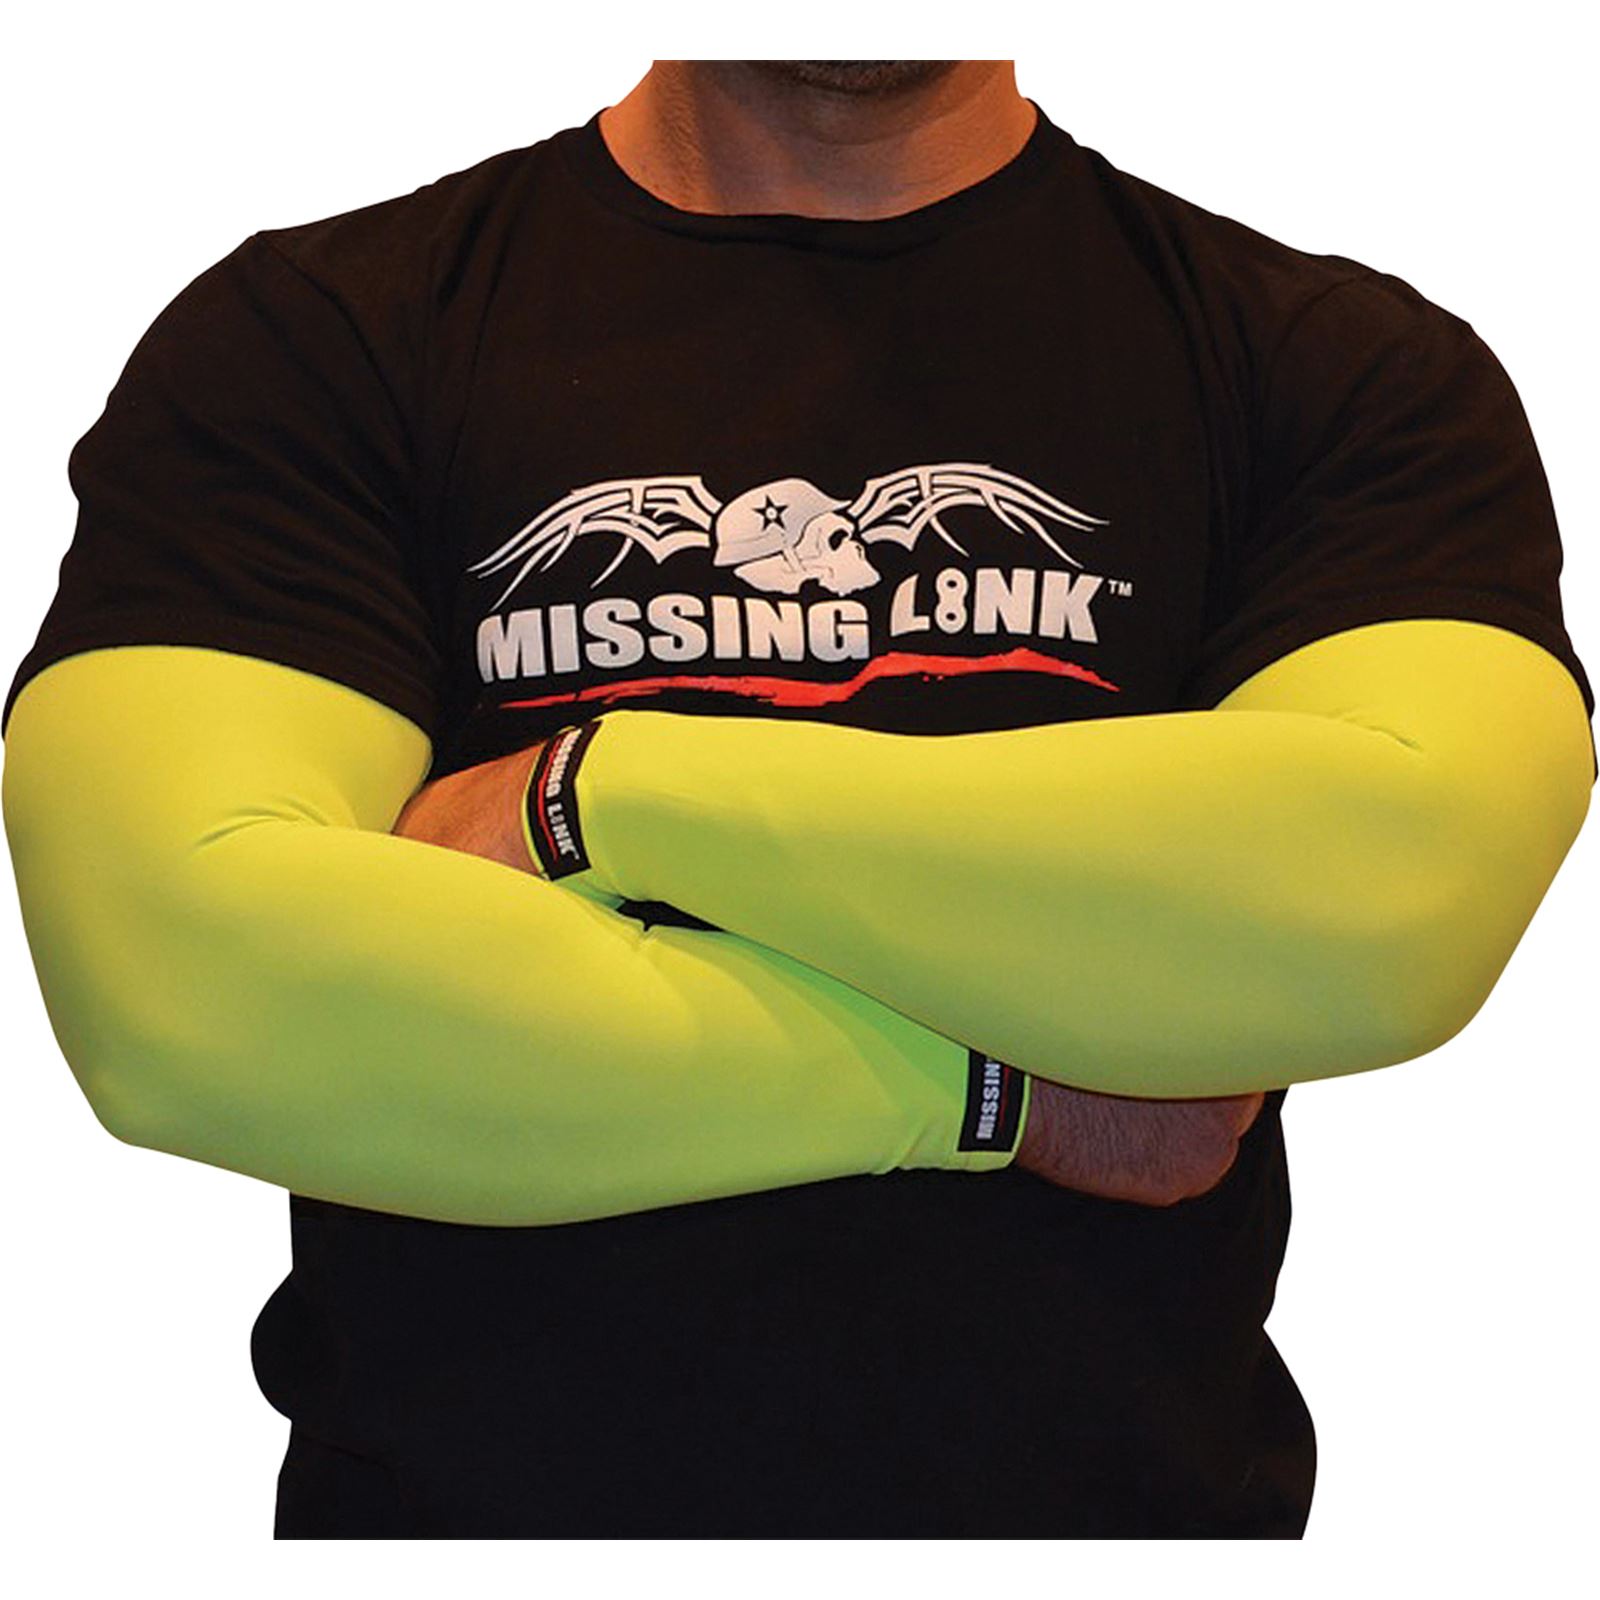 Missing Link Arm Pro Compression Sleeves